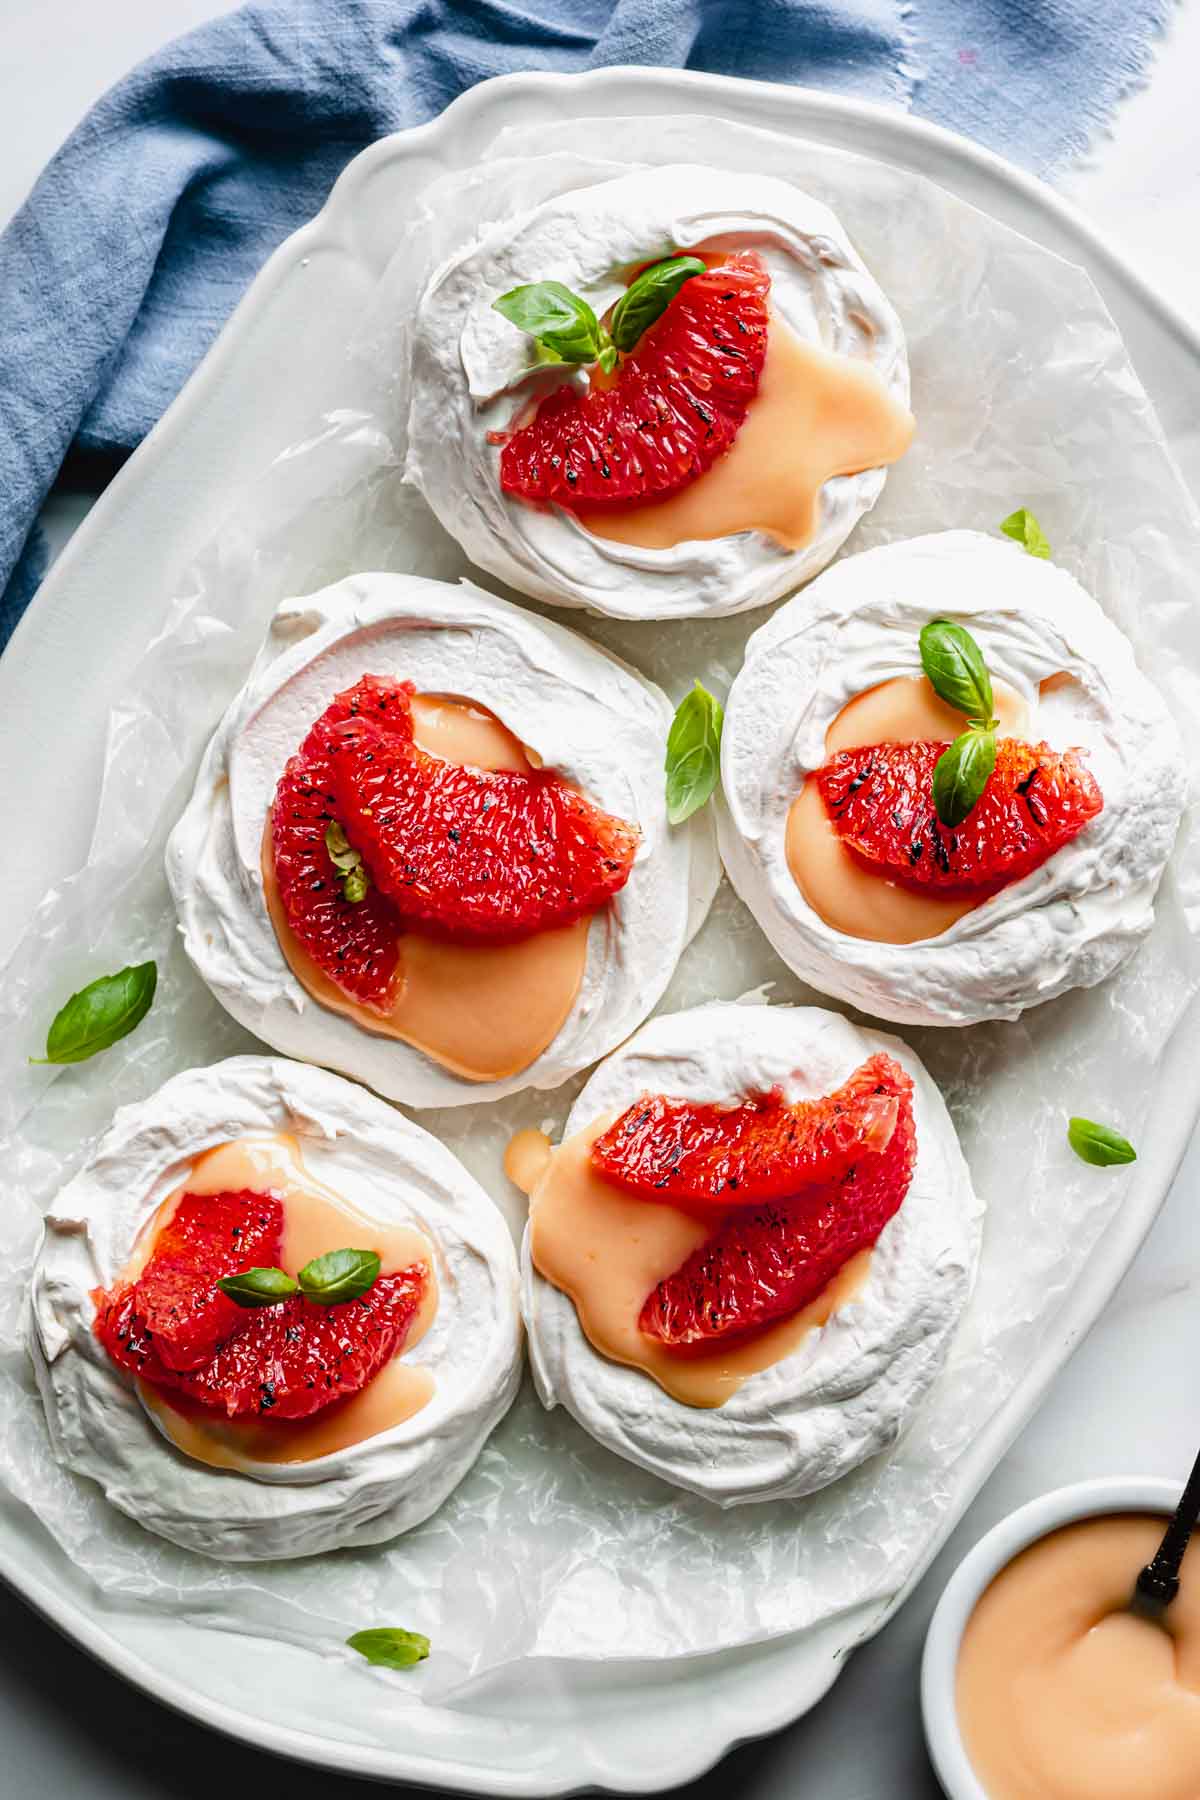 A platter with five assembled mini pavlova nests. Small pieces of basil garnish the platter.